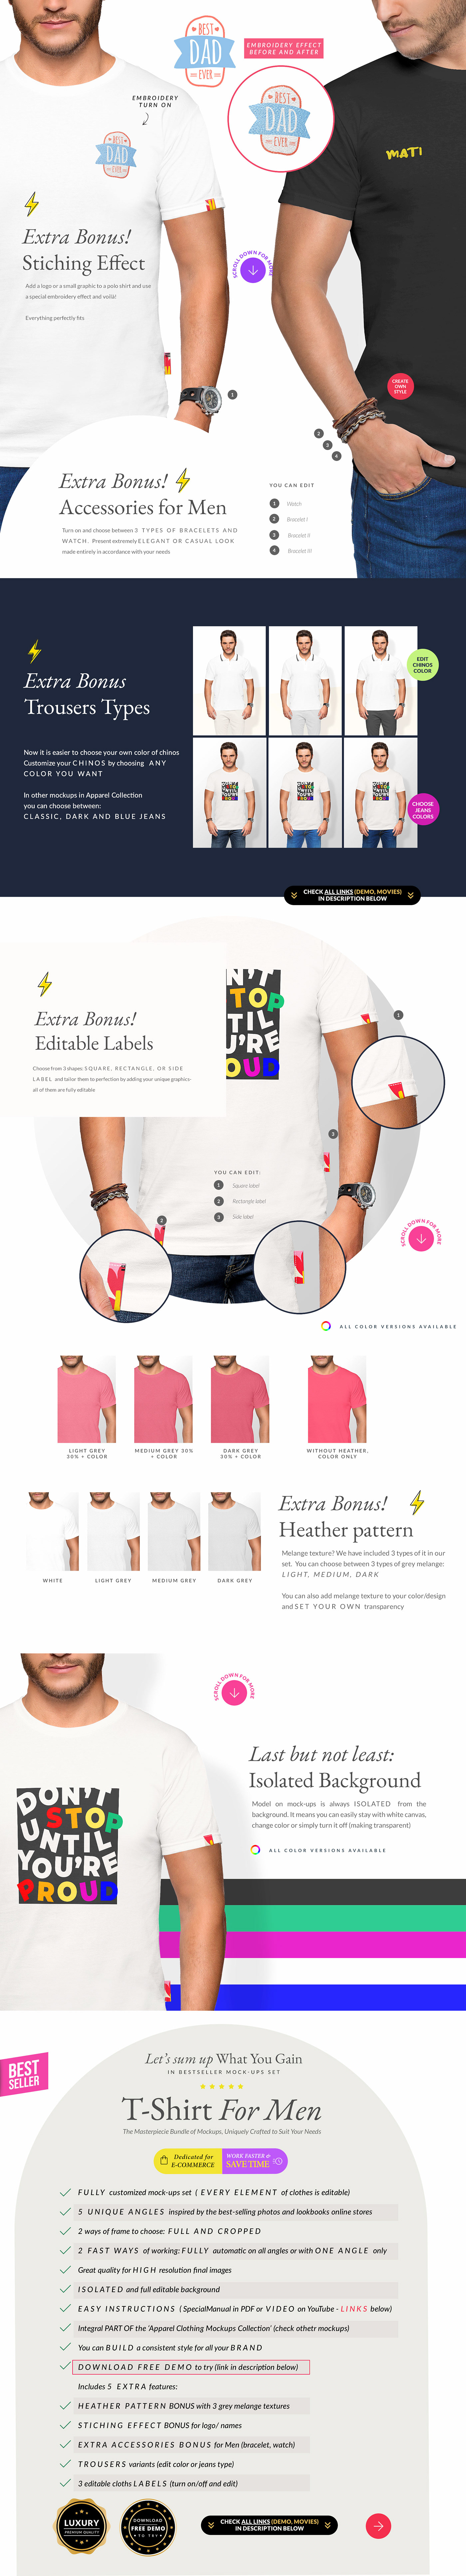 mock-up Mockup mockups mock up mockup design tshirt template print sublimation free